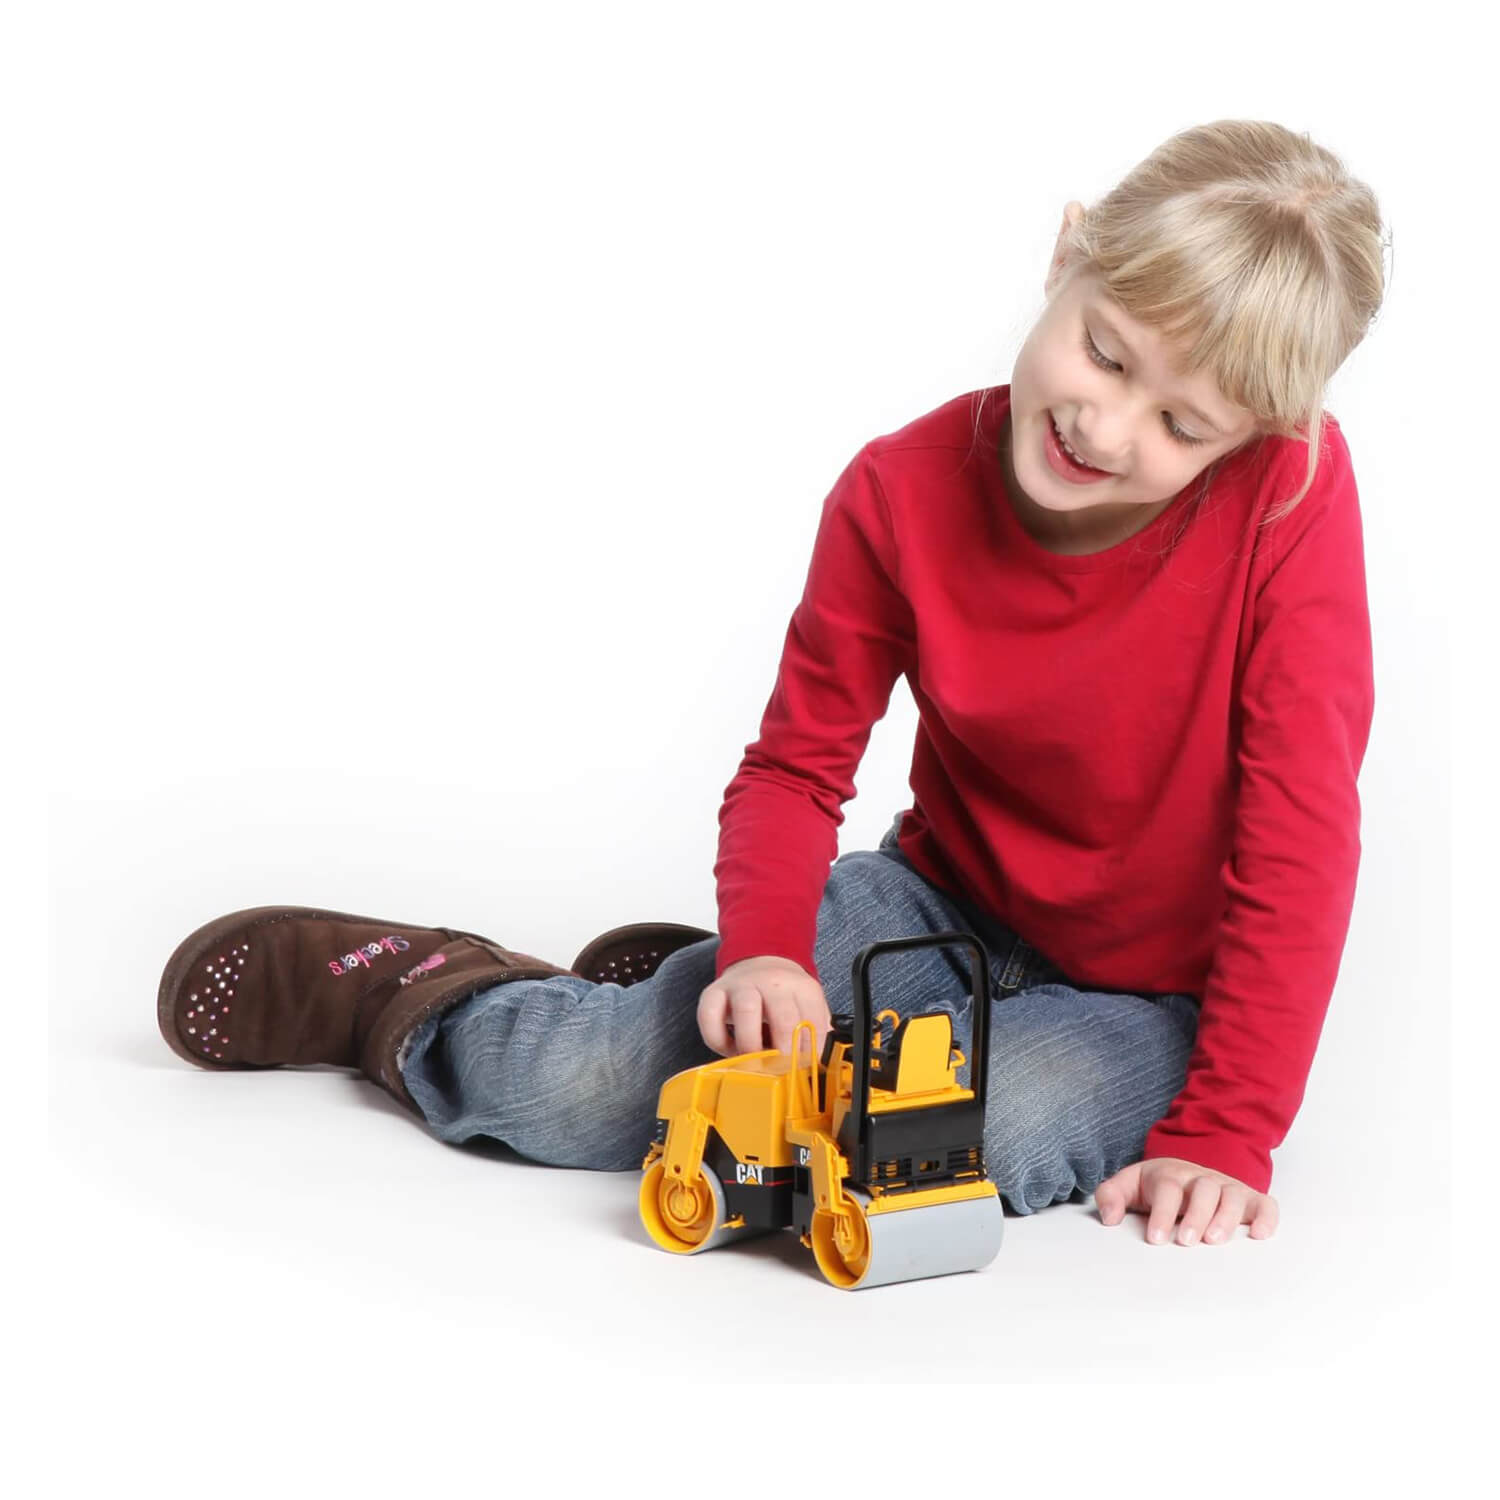 Child playing with the asphalt drum compactor toy.